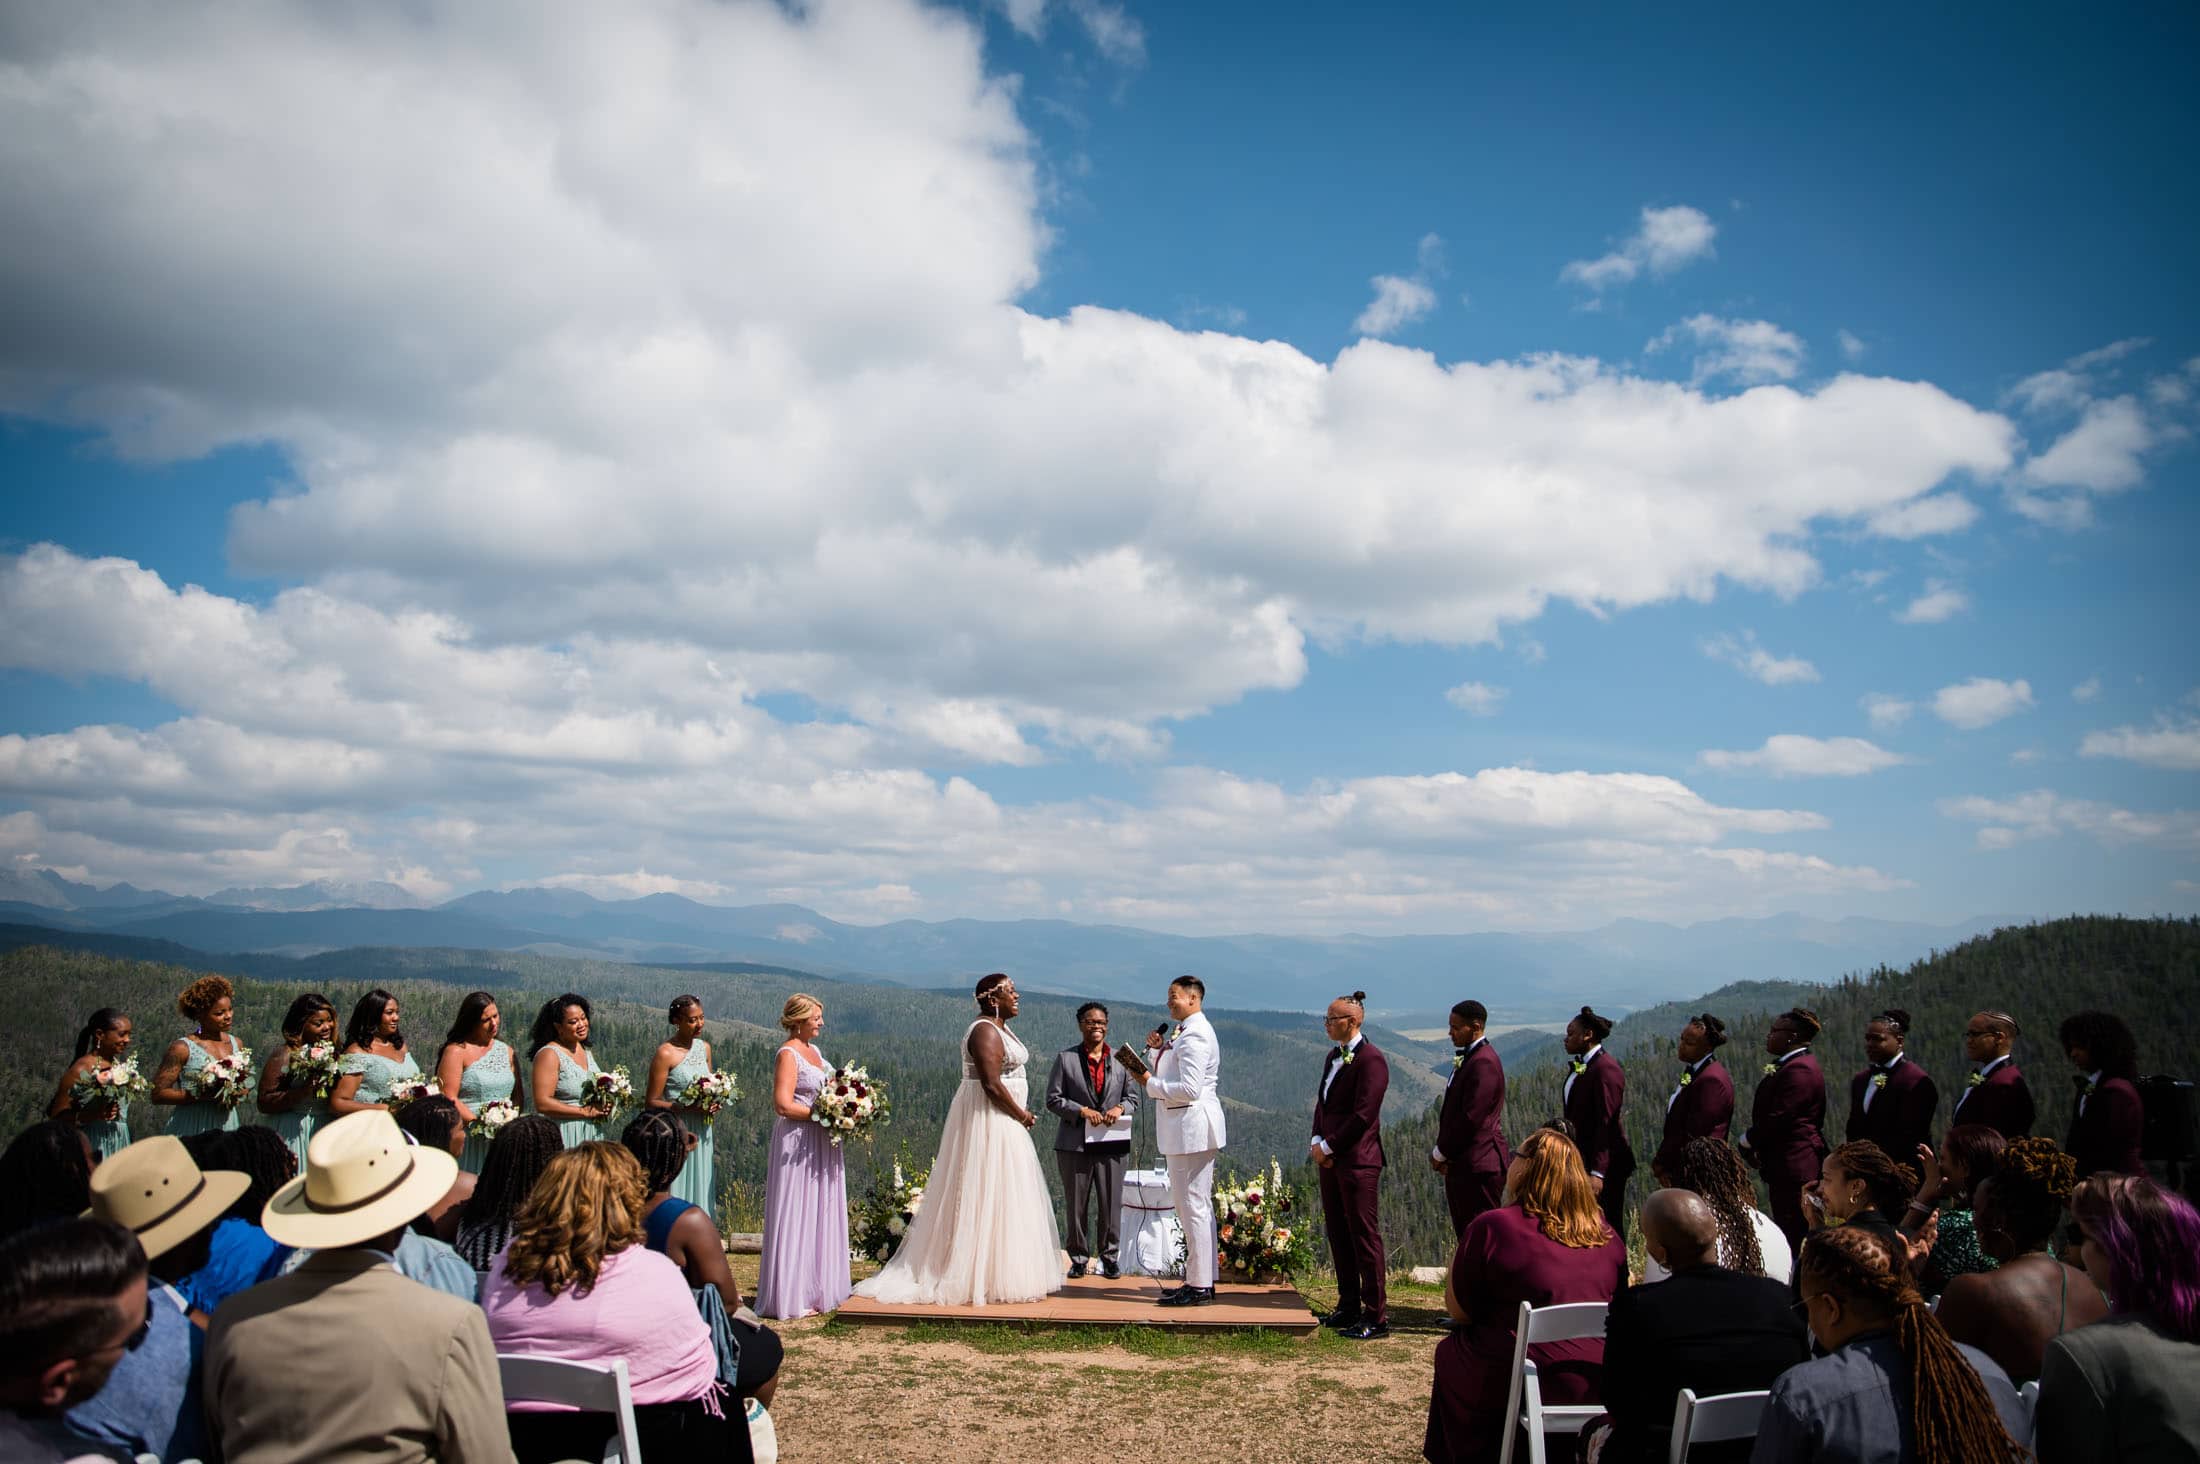 an LGBTQ+ couple says their vows in front of all their guests at their Granby Ranch ski resort wedding with views overlooking Mt. Audubon, Apache Peak and Mt. Jasper in the background.